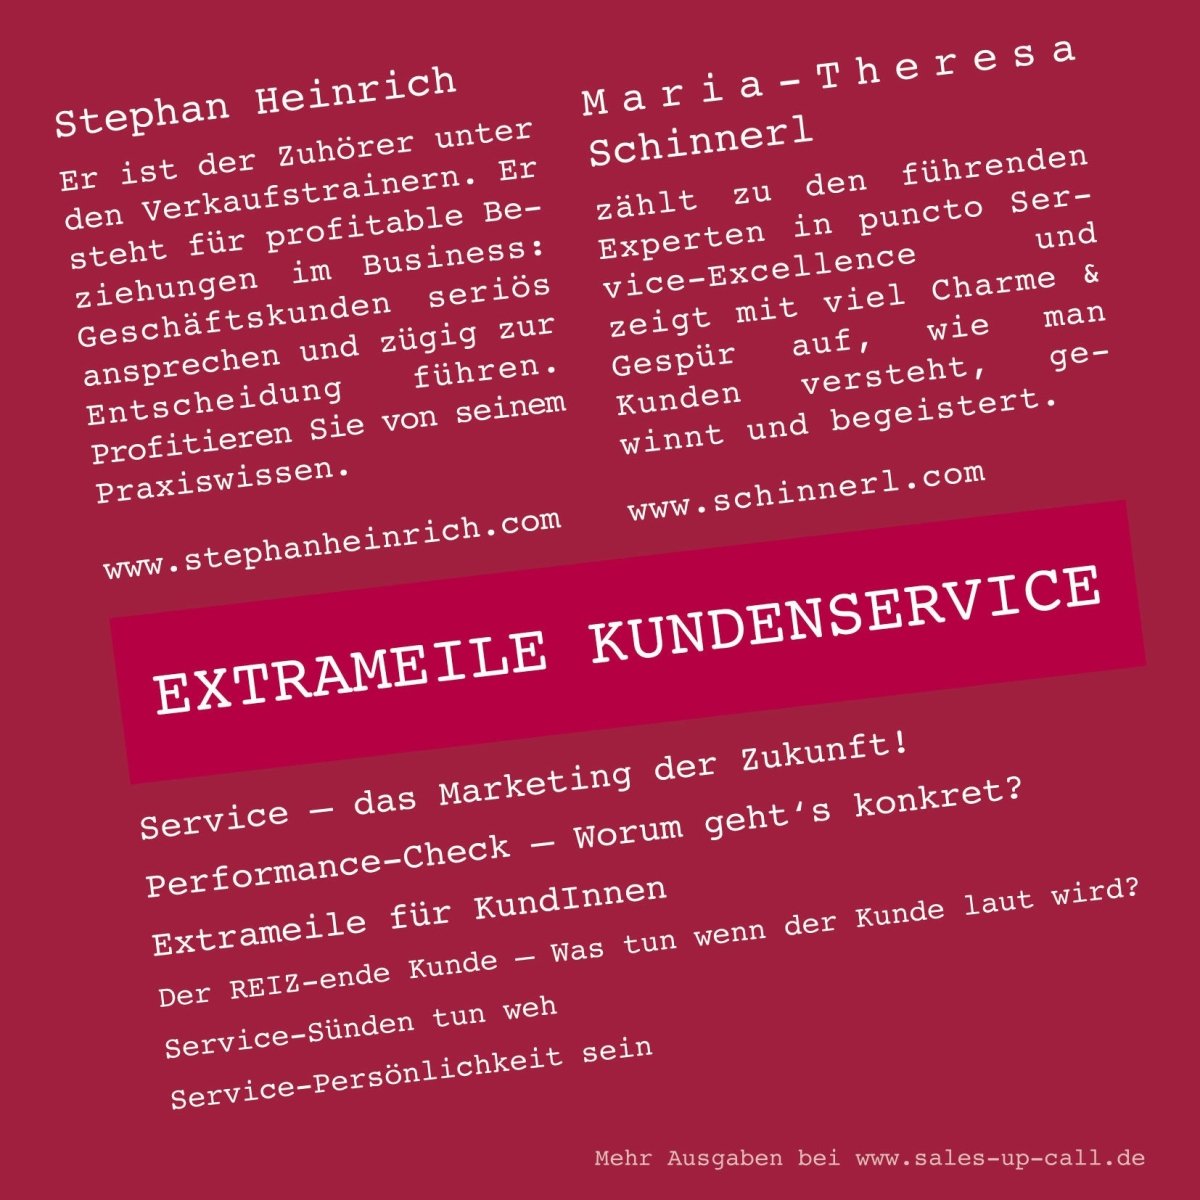 Extrameile Kundenservice - Sales-up-Call - Stephan Heinrich